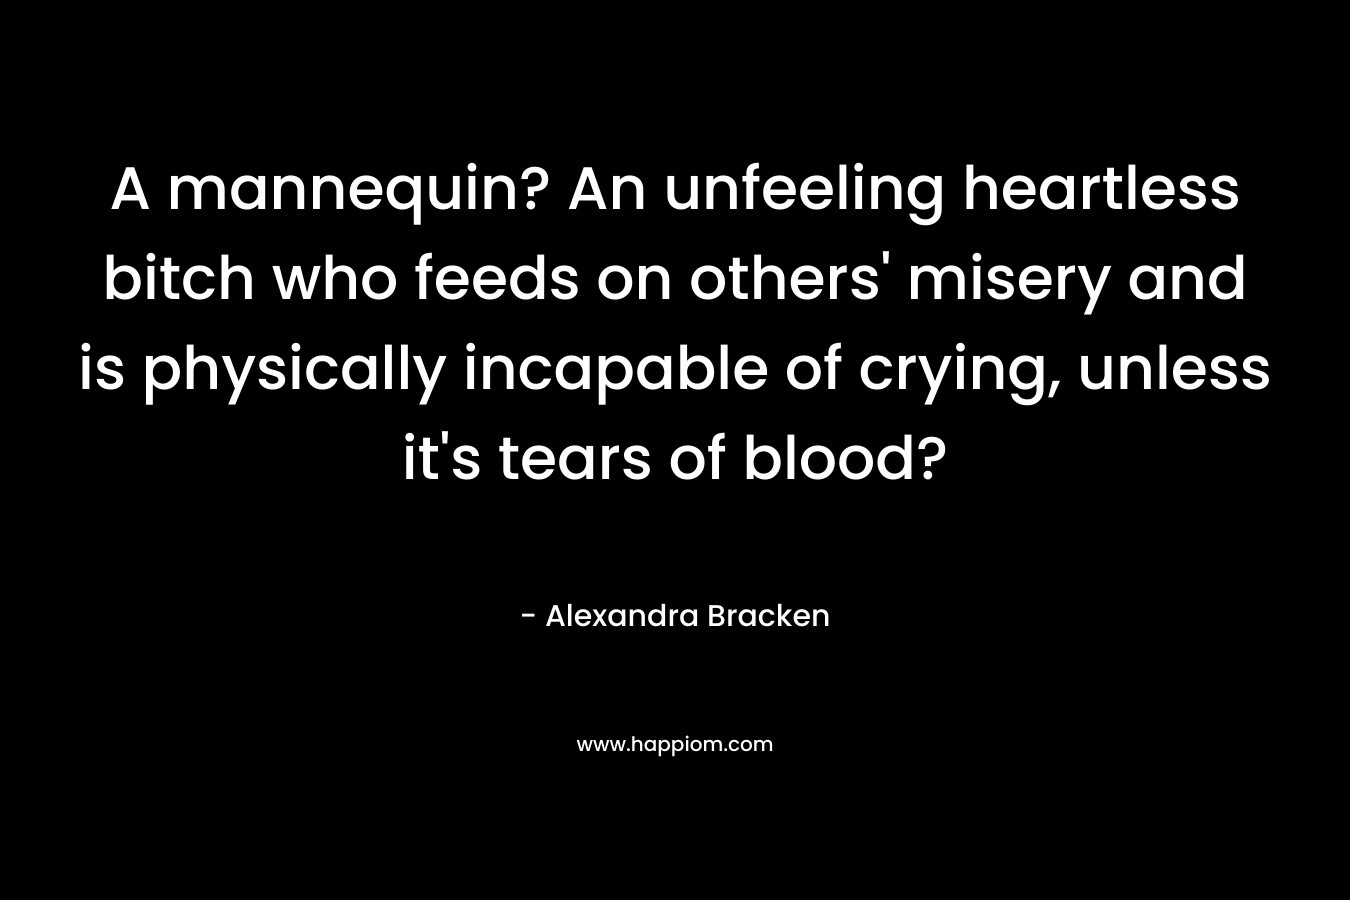 A mannequin? An unfeeling heartless bitch who feeds on others’ misery and is physically incapable of crying, unless it’s tears of blood? – Alexandra Bracken